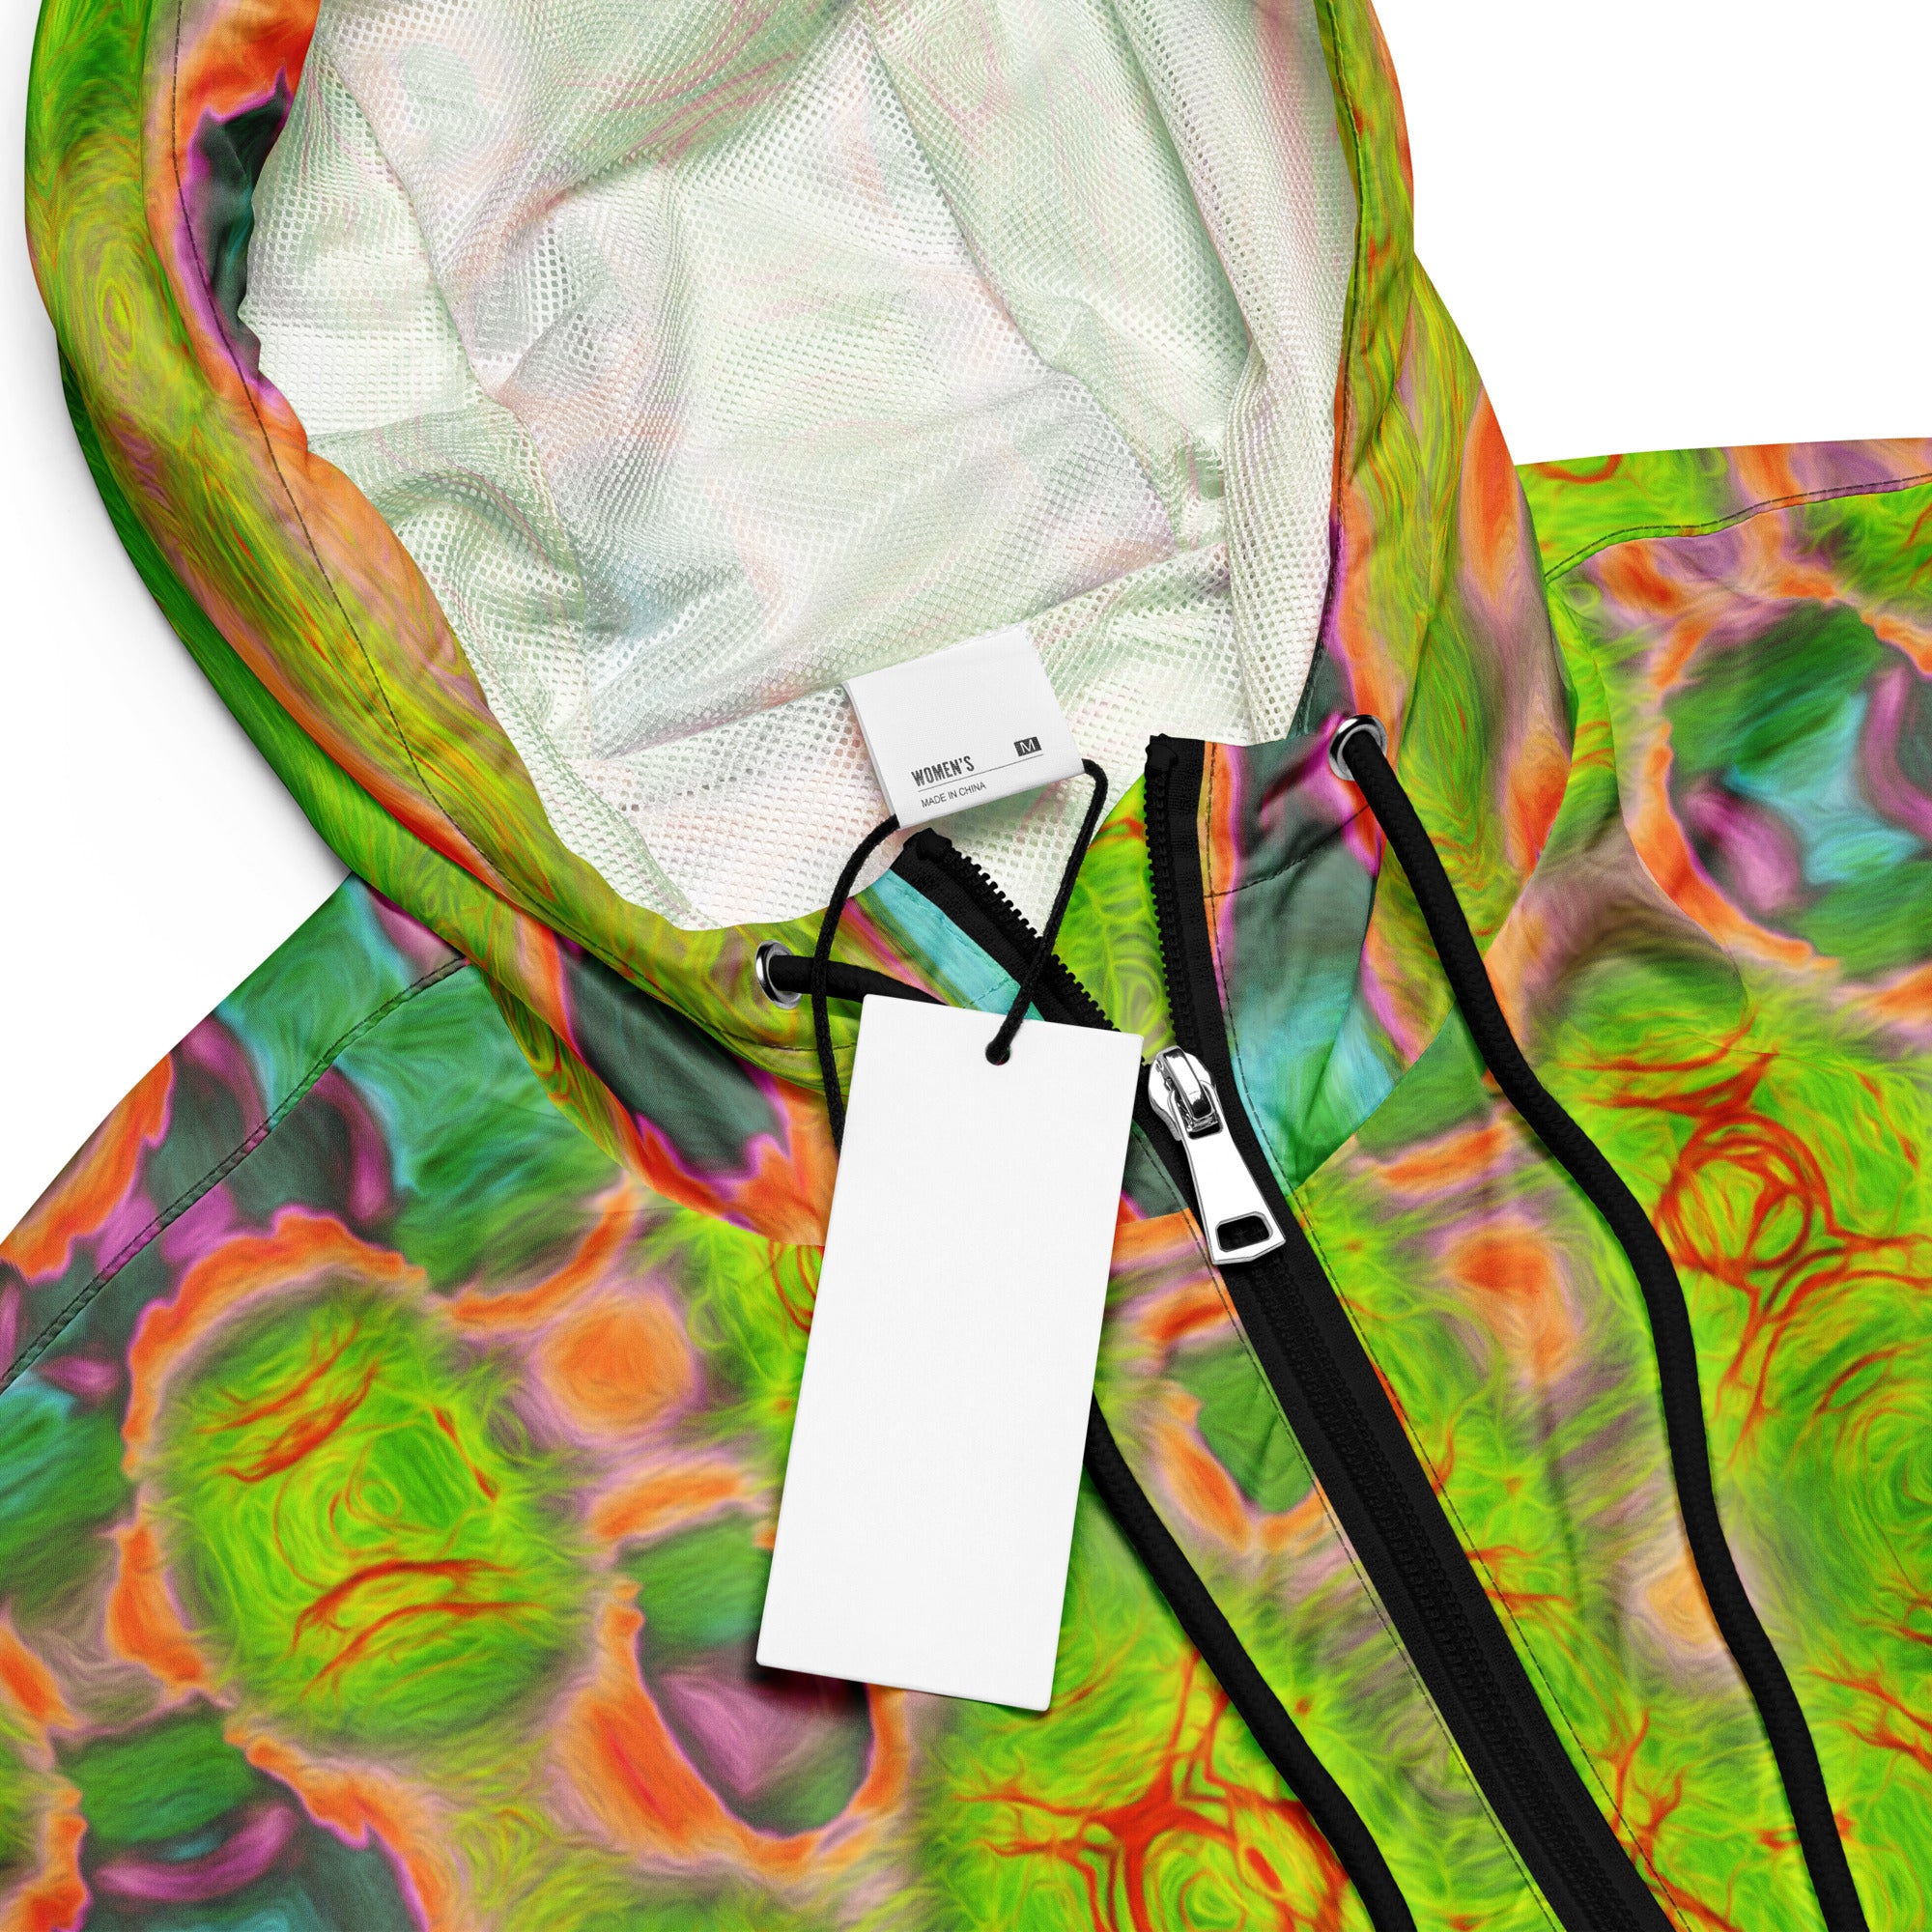 Women’s Cropped Windbreaker | Abstract Yellow and Red Wavy Tie Dye Clouds